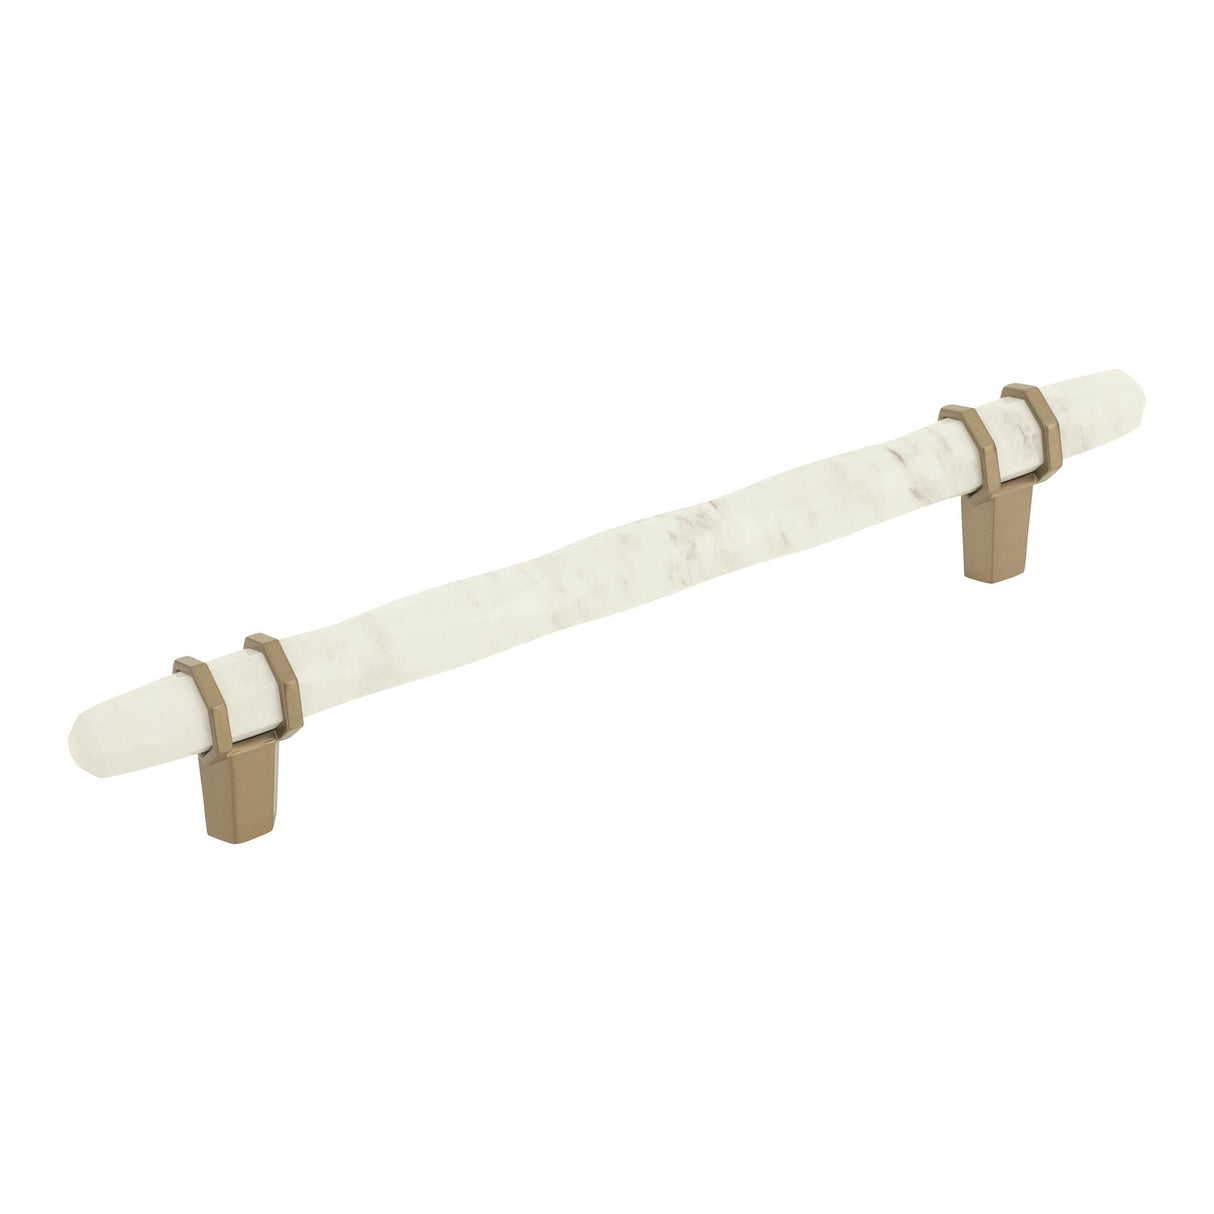 Amerock Cabinet Pull Marble White/Golden Champagne  6-5/16 inch (160 mm) Center to Center Carrione 1 Pack Drawer Pull Drawer Handle Cabinet Hardware